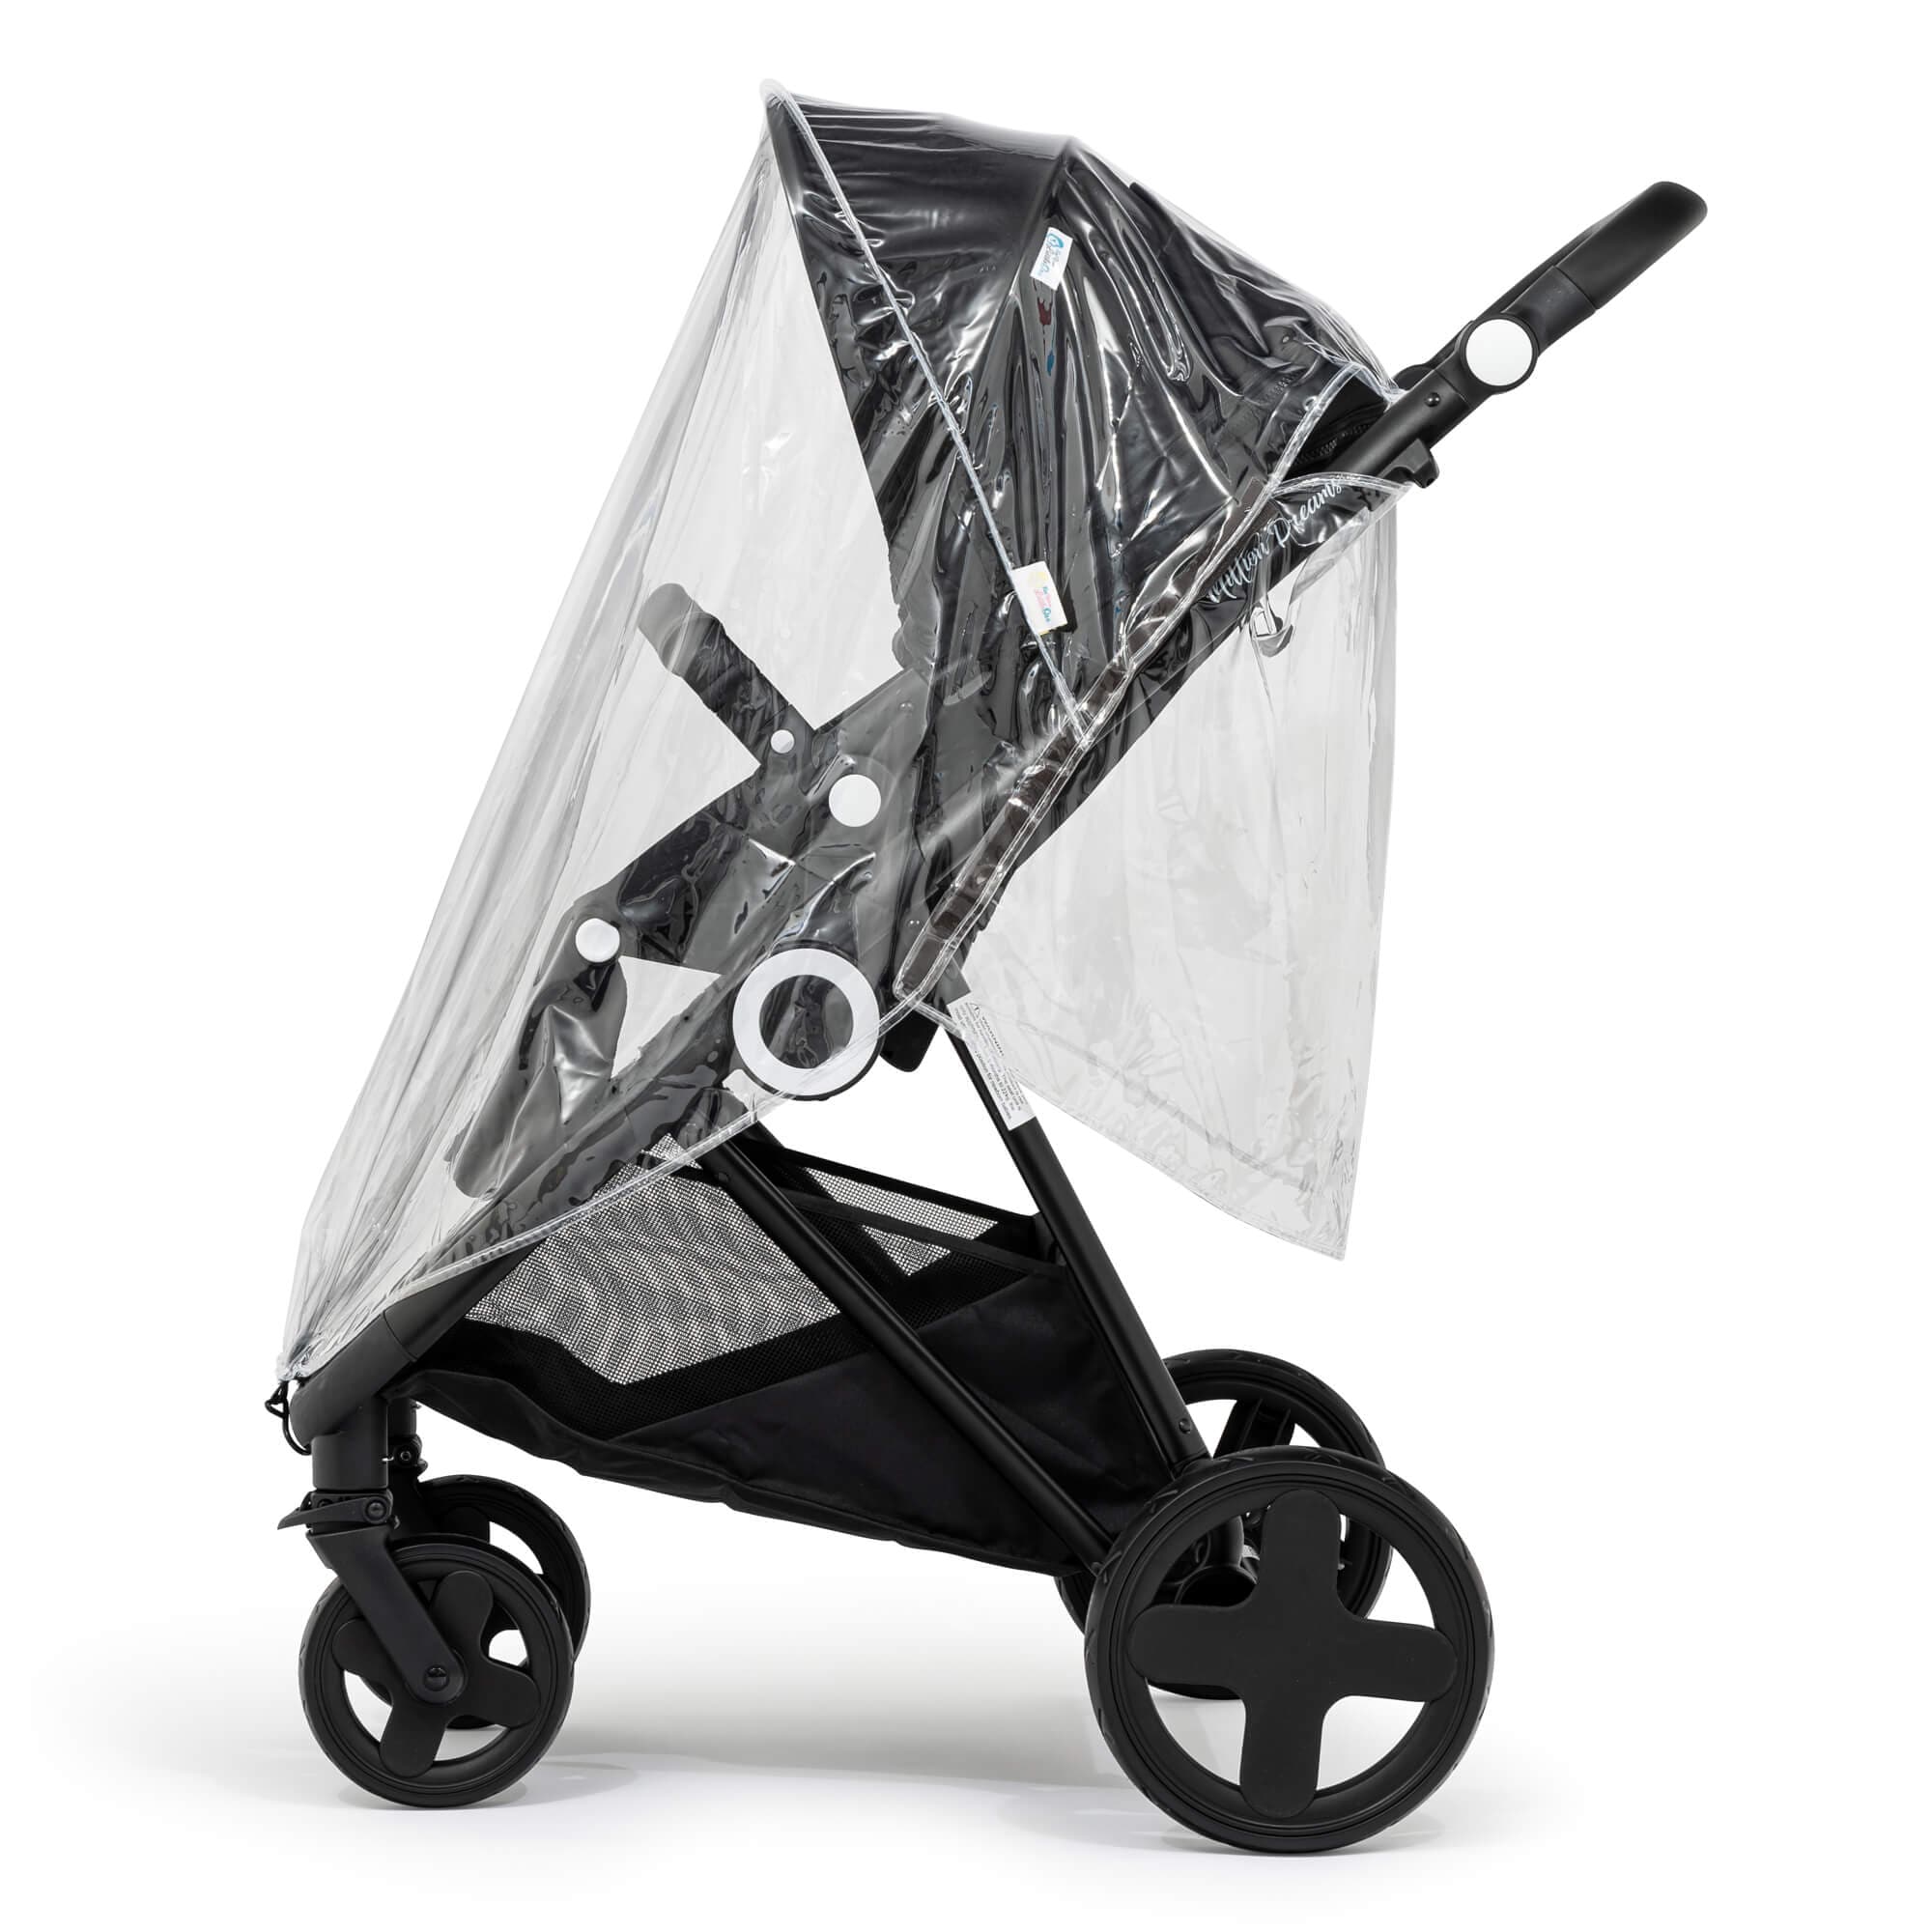 Pushchair Raincover Compatible With Bebecar - For Your Little One